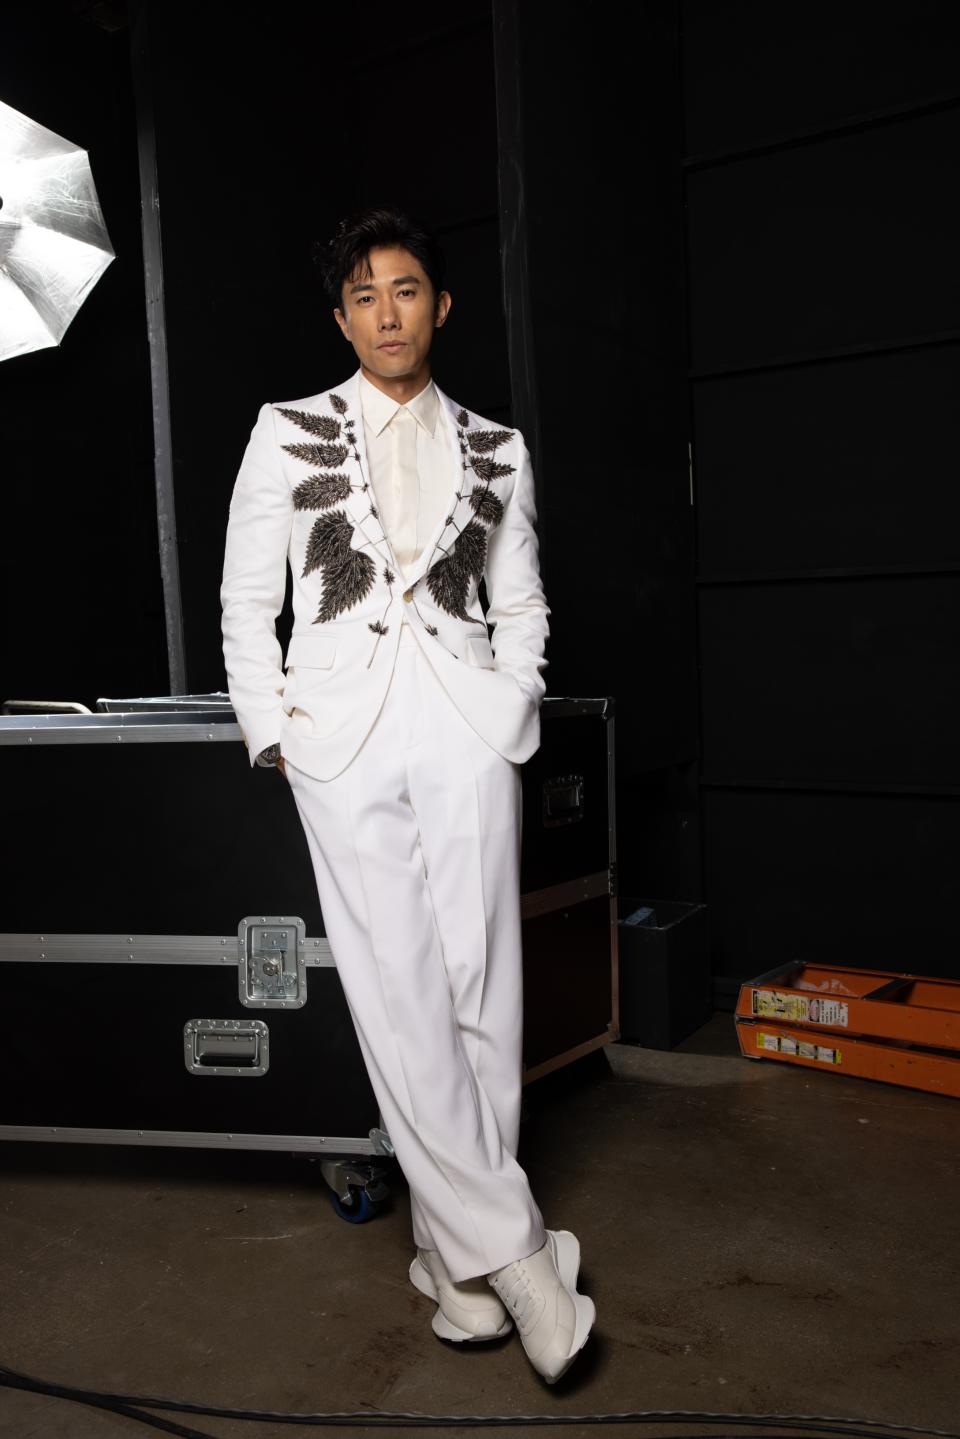 Actor Desmond Tan (陳泂江) wore an ivory single-breasted tailored jacket with silver nettle embroidery and matching wide-legged trousers and Sprint Runner at the annual Star Awards 2023 in Singapore on 9 April. (PHOTO: Alexander McQueen)